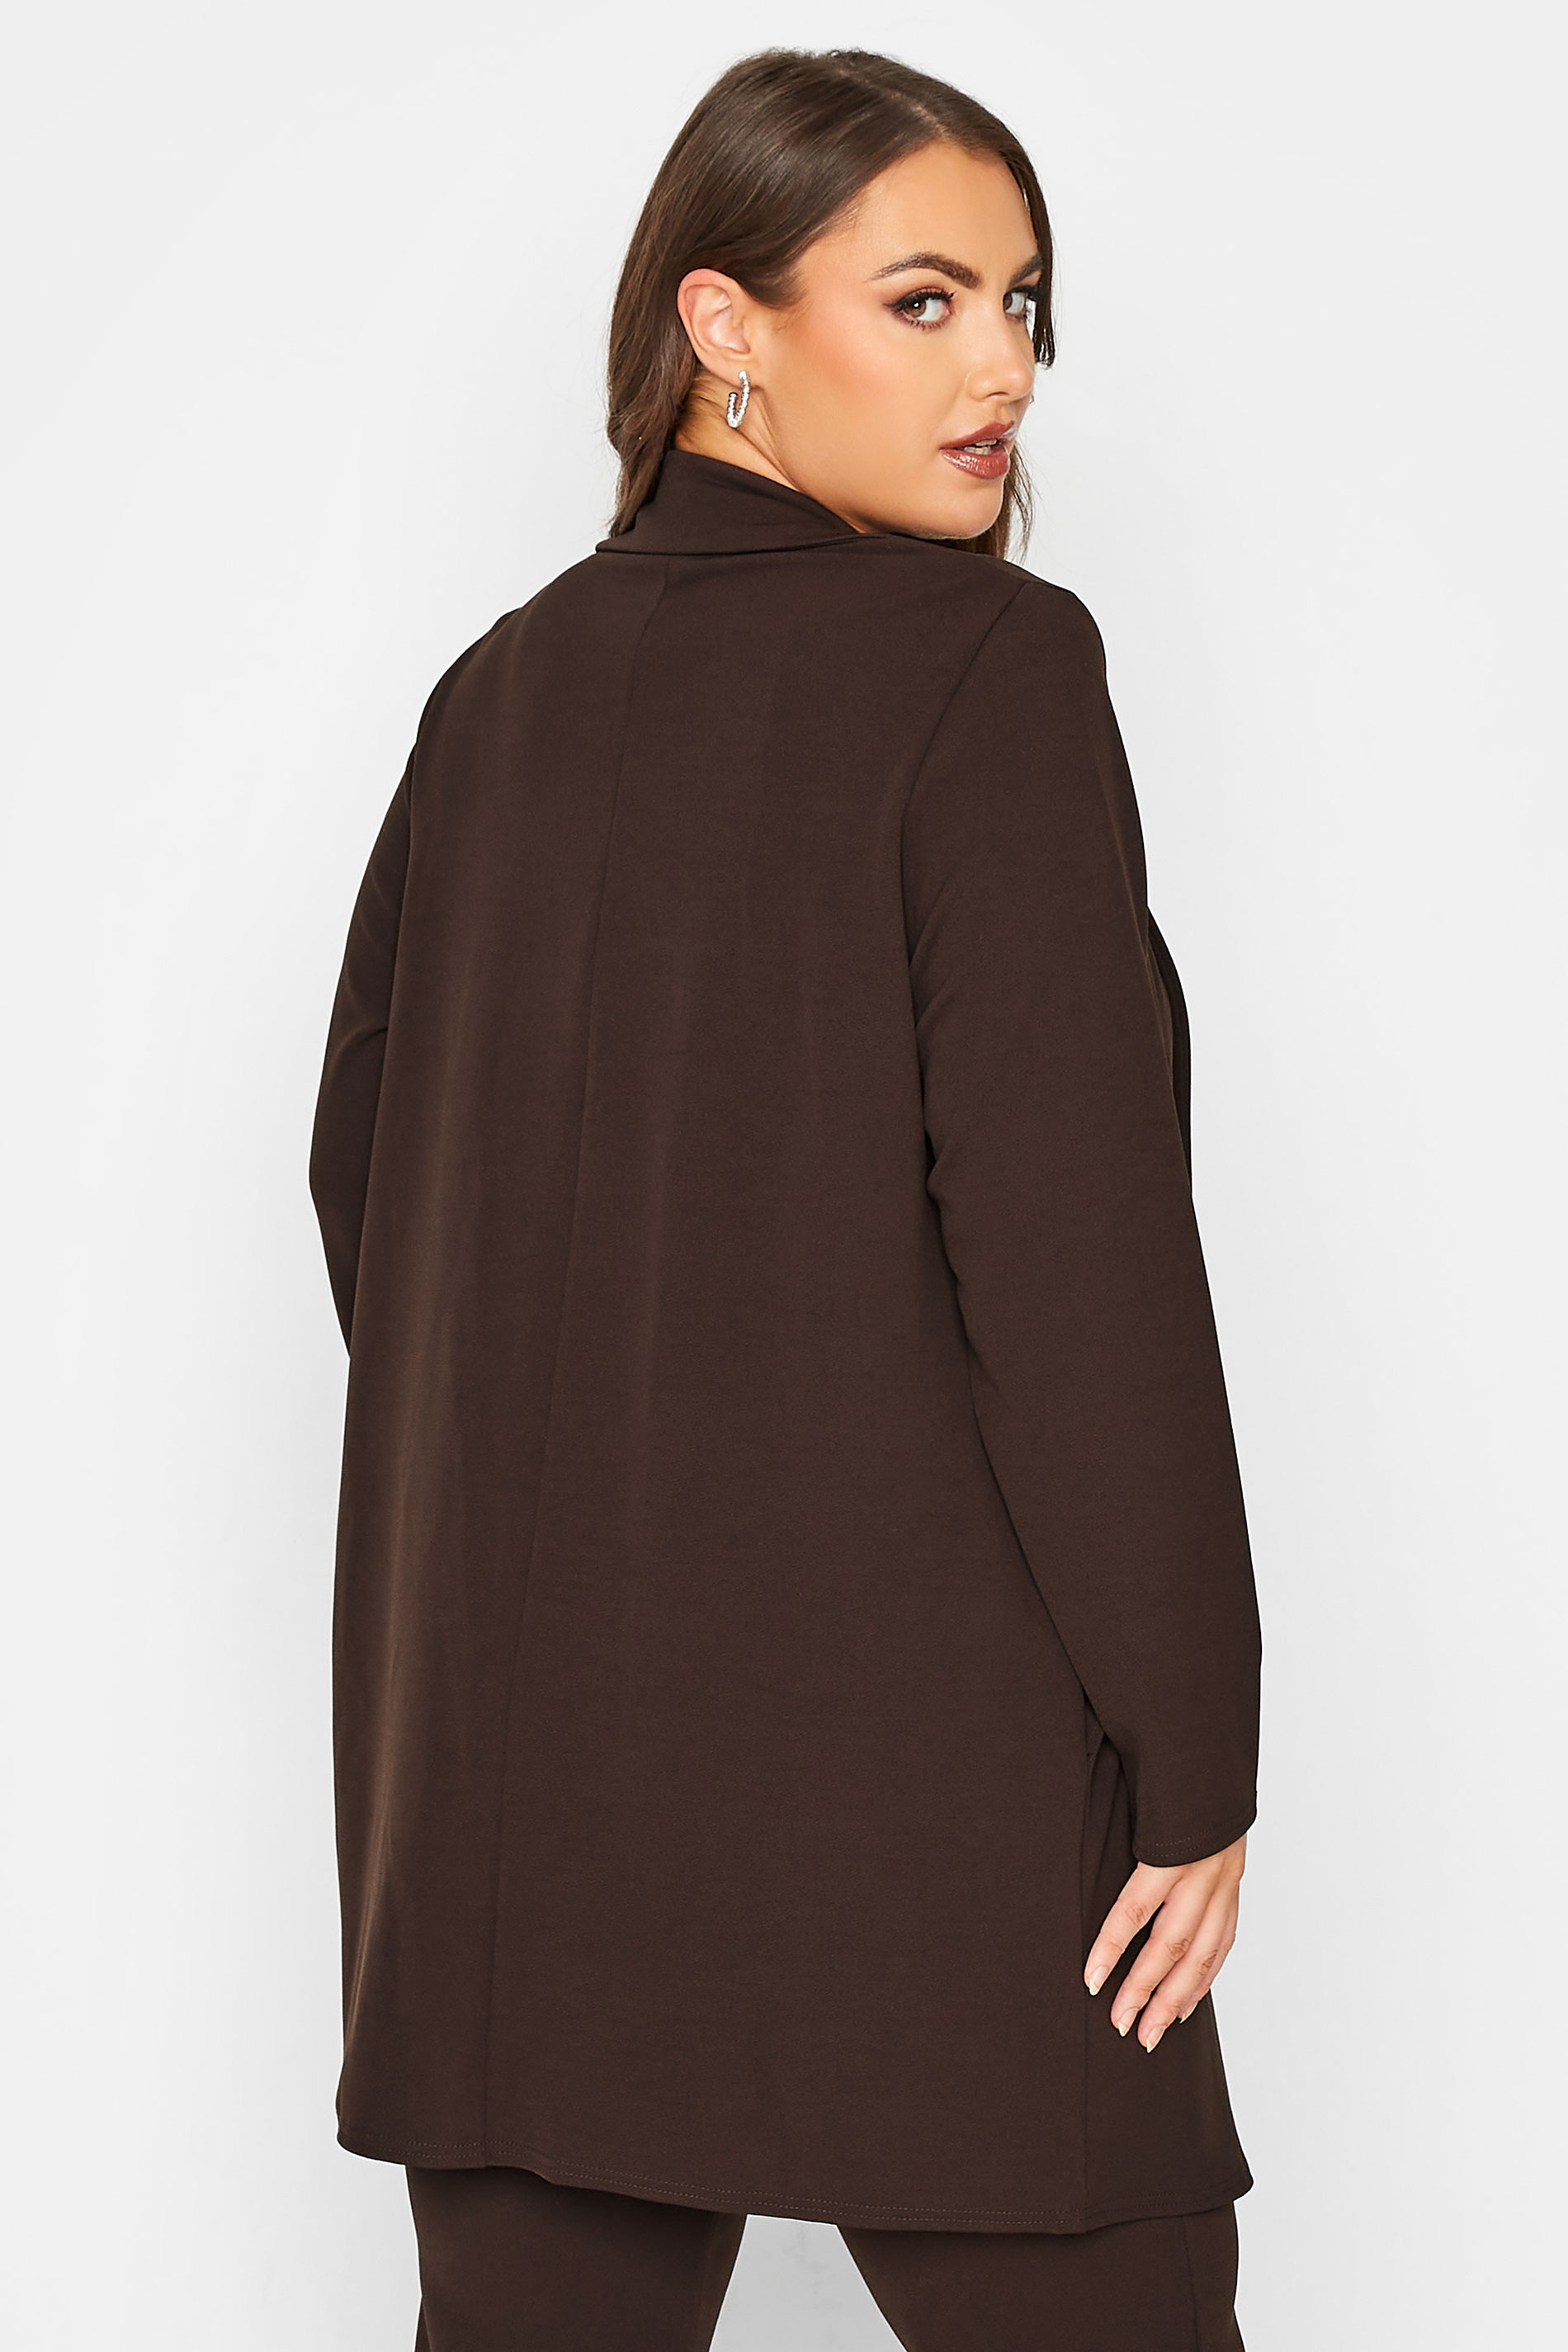 LIMITED COLLECTION Plus Size Chocolate Brown Longline Blazer | Yours Clothing 3